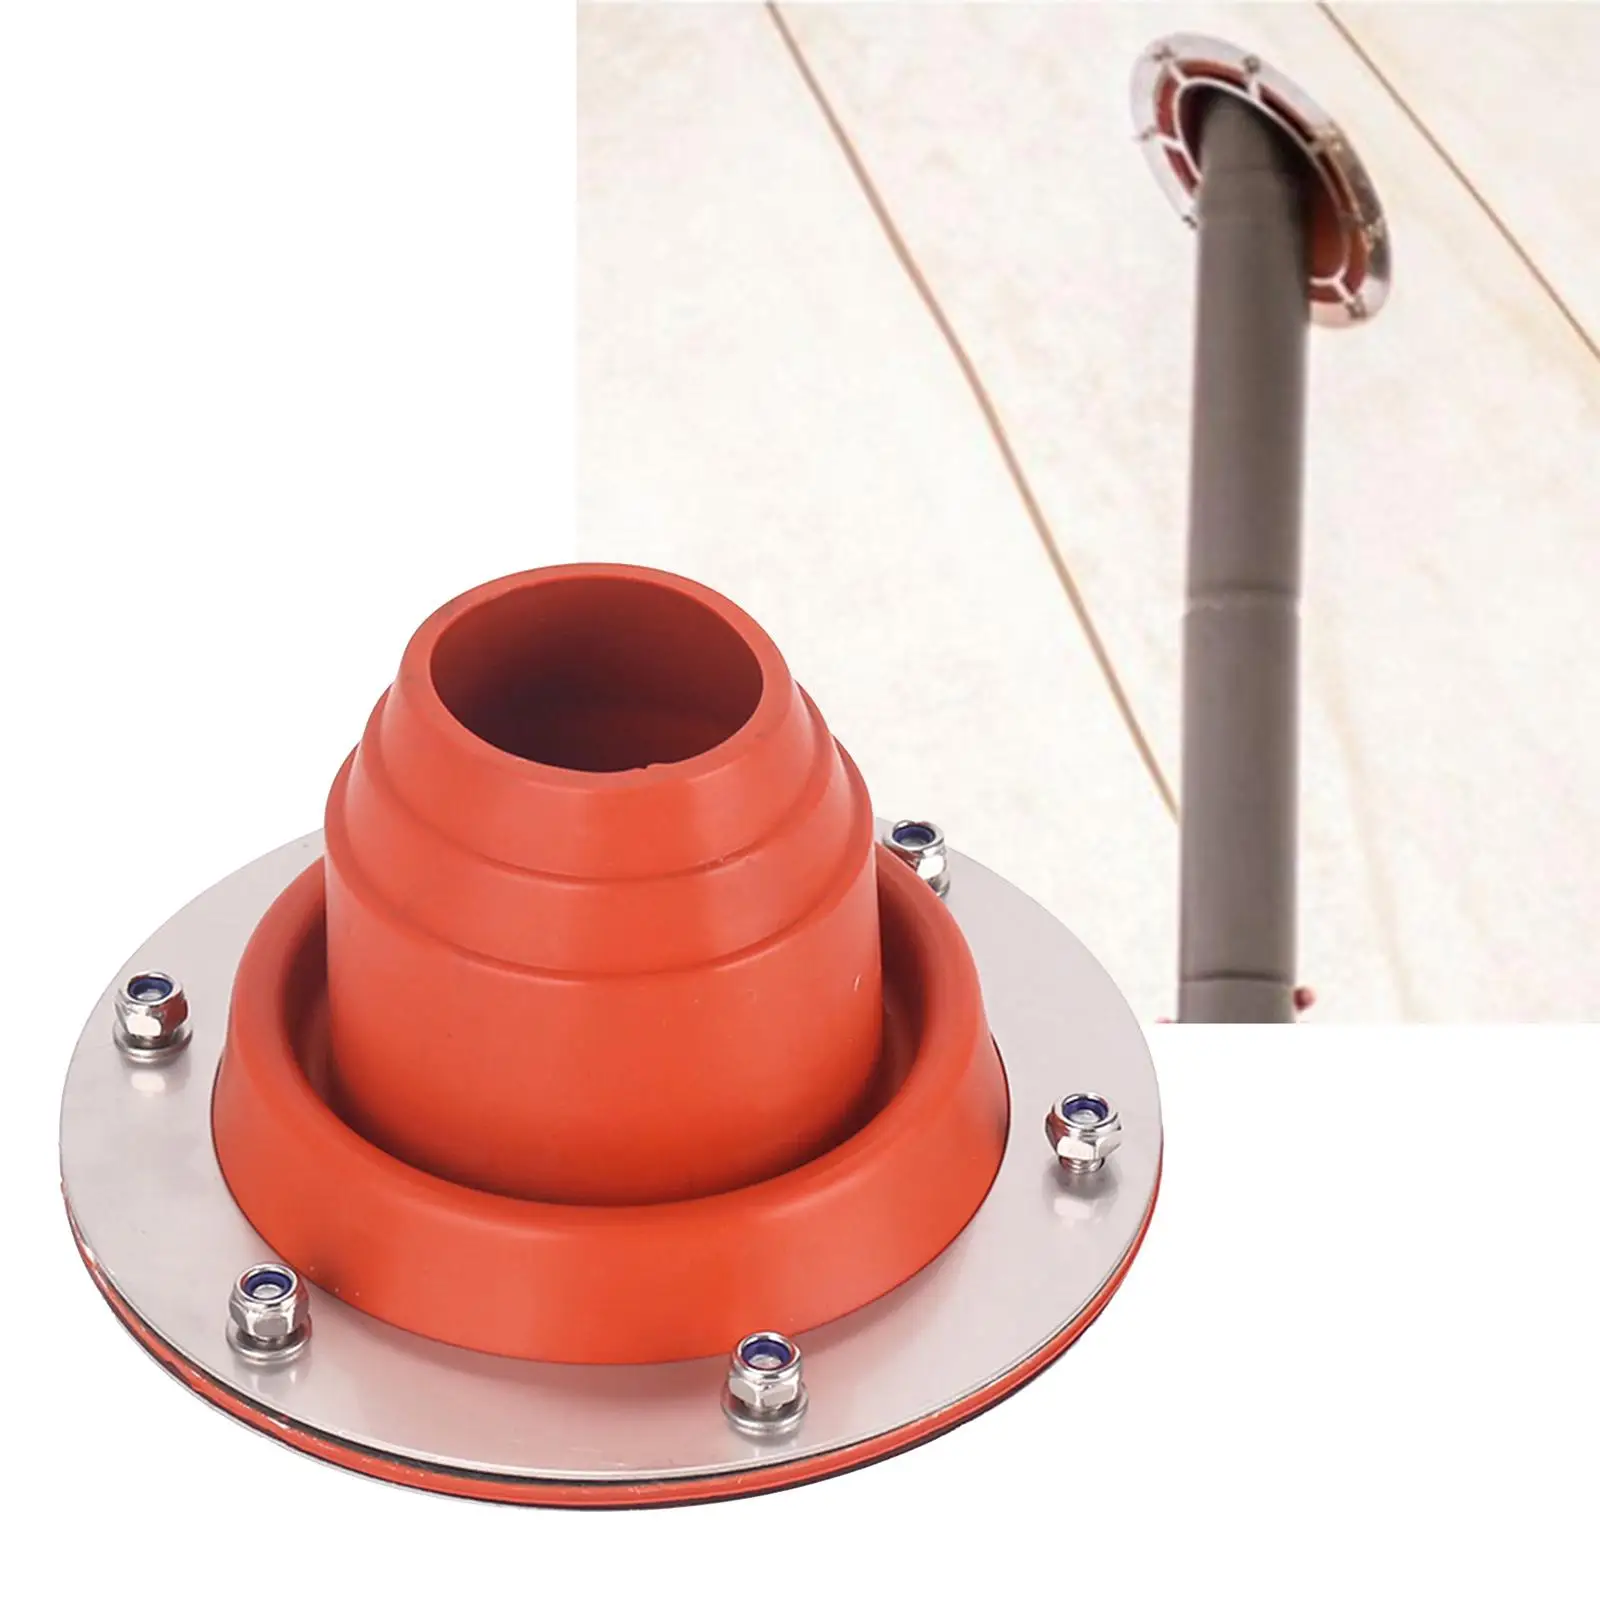 Tent Stove  Stove et Hole Anti-Scald  Tube for Backpacking Wood Stove Accessory